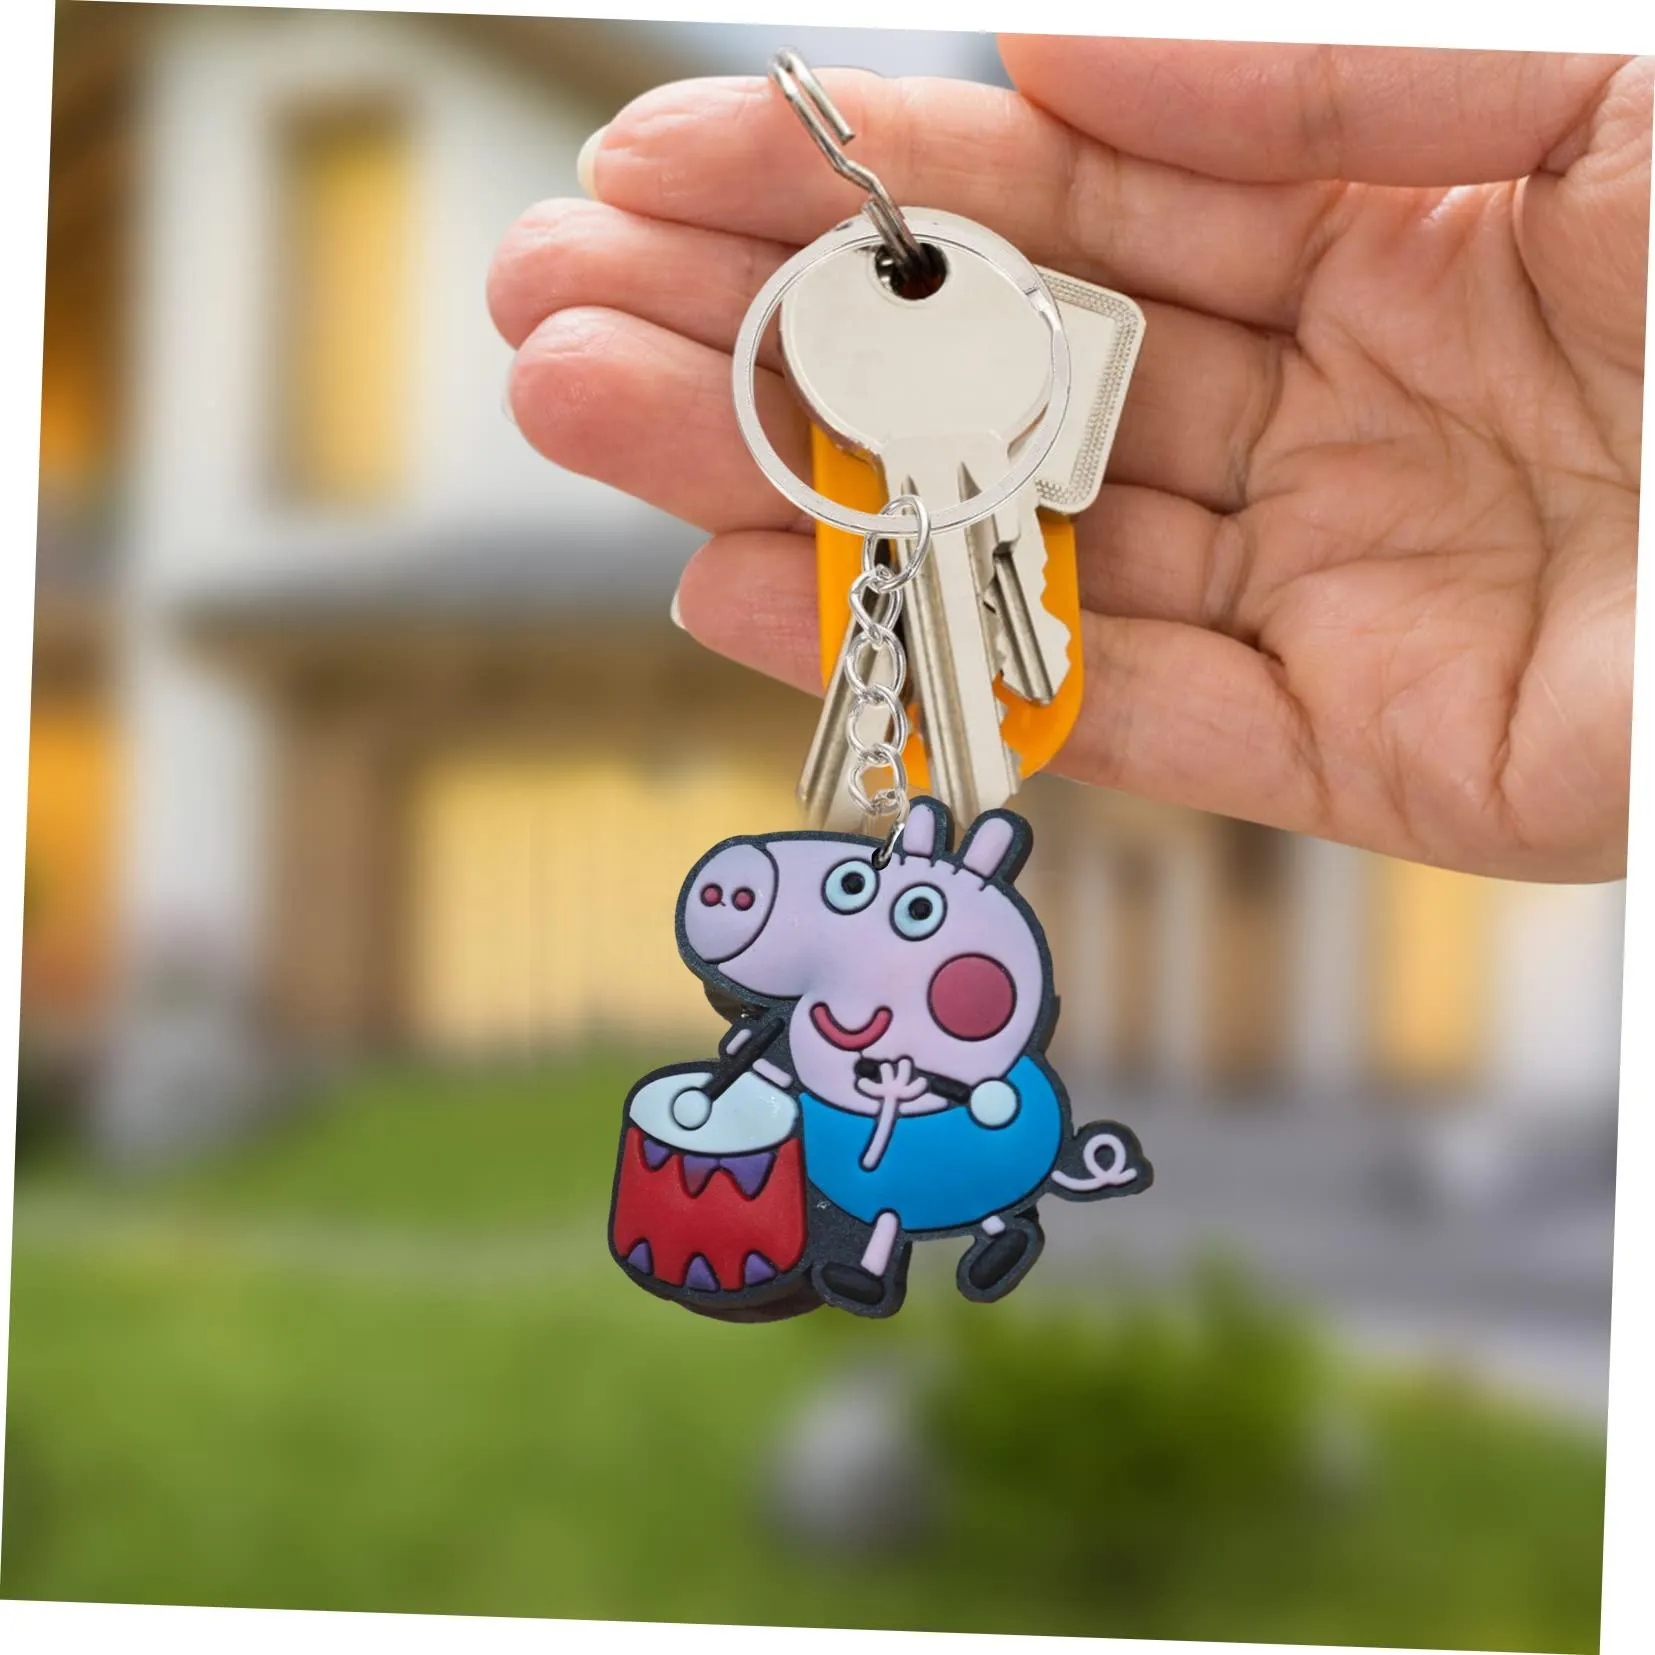  10 keychain keychains party favors key chain for kid boy girl gift rings keyring suitable schoolbag women men backpack